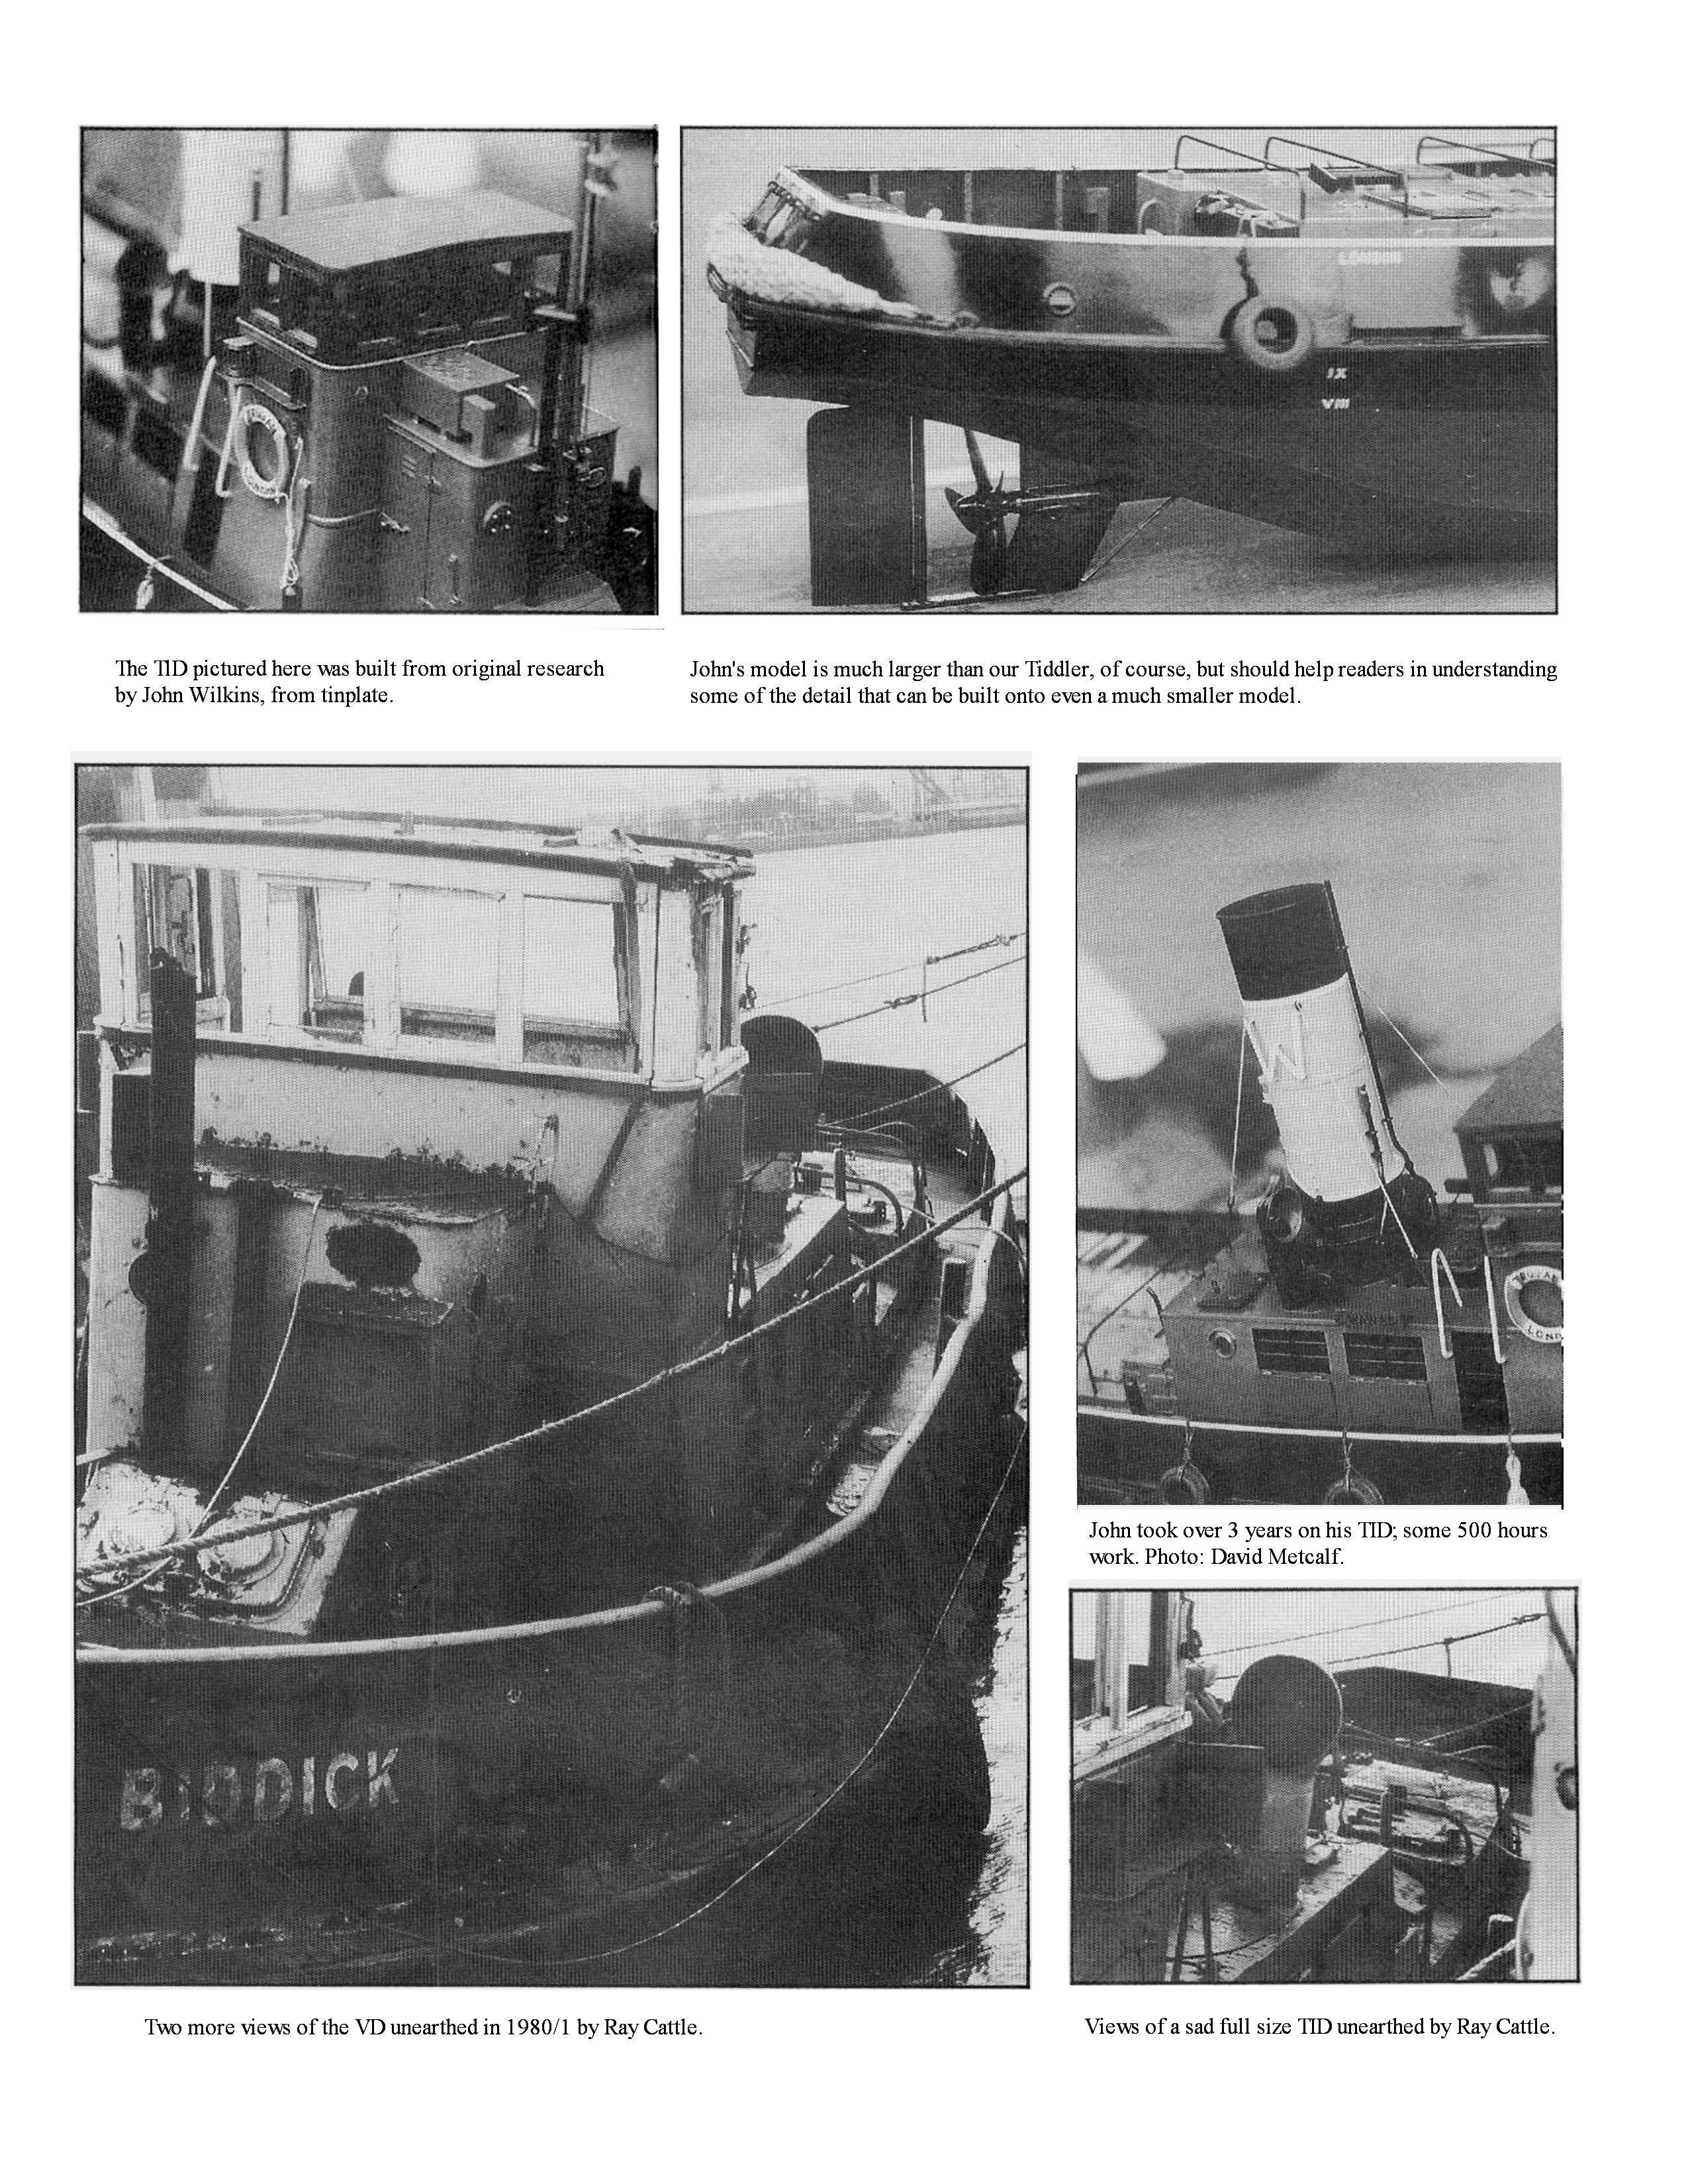 full size printed plans to build a 1:40 scale ww ii t.i.d. tug suitable for r/c